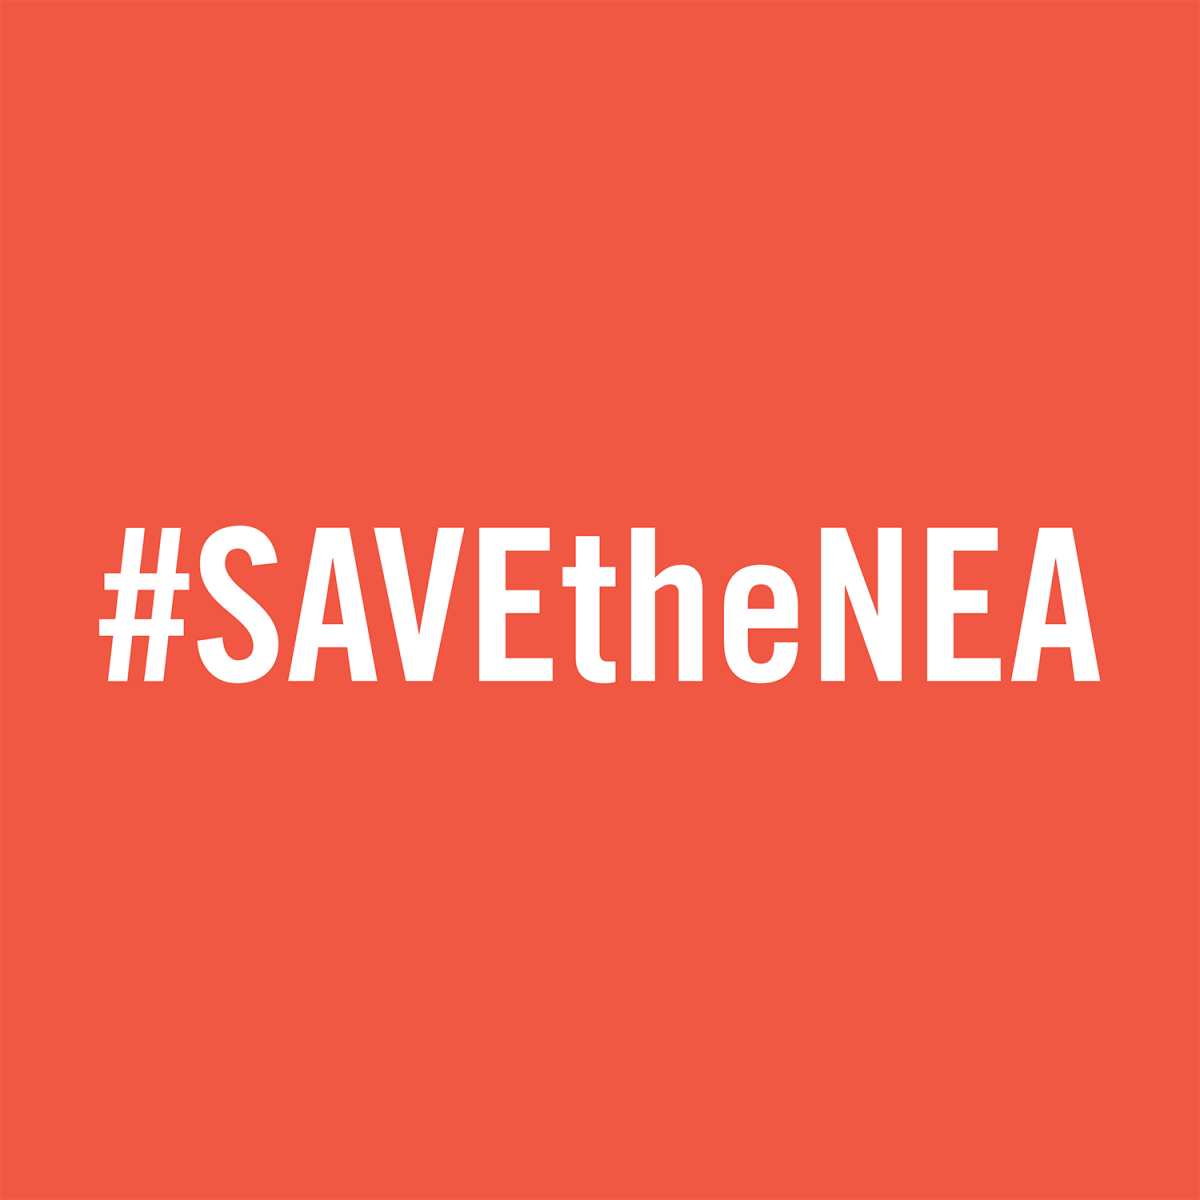 Using Red Square Logo - Save the NEA | Americans for the Arts